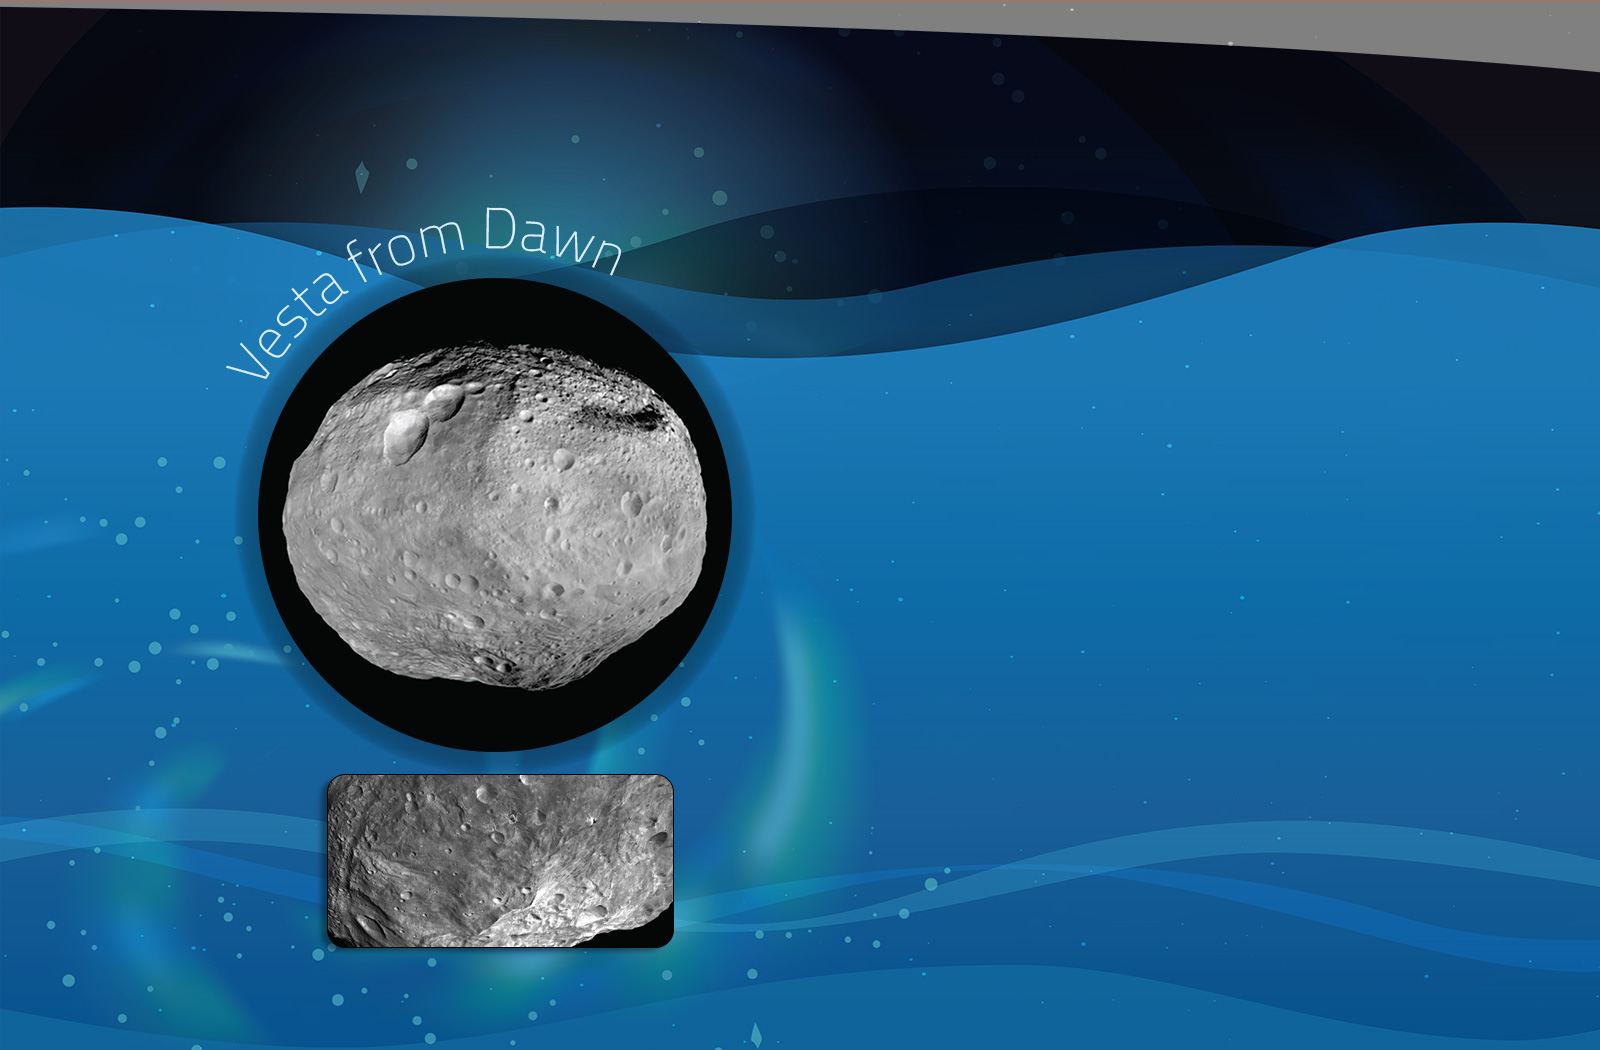 Asteroid Vesta from Dawn mission.